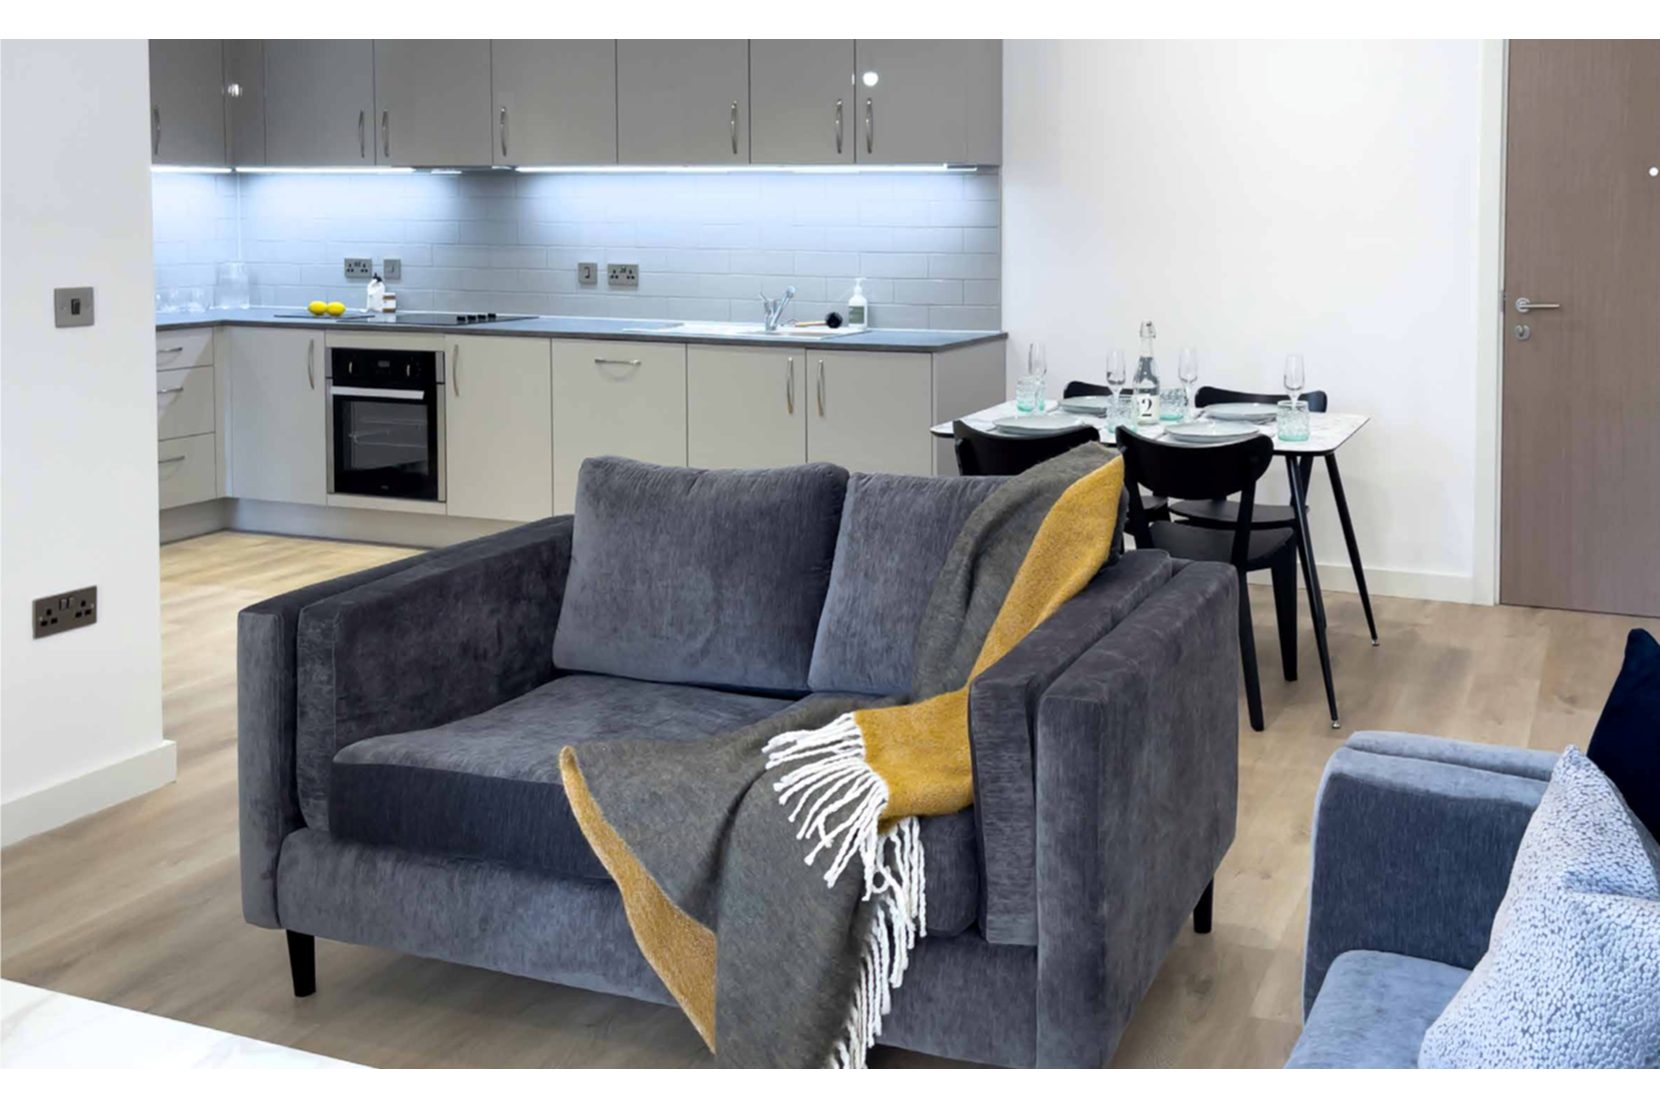 Apartments to Rent by Northern Group at The Quarters, Manchester, M1, kitchen dining living area